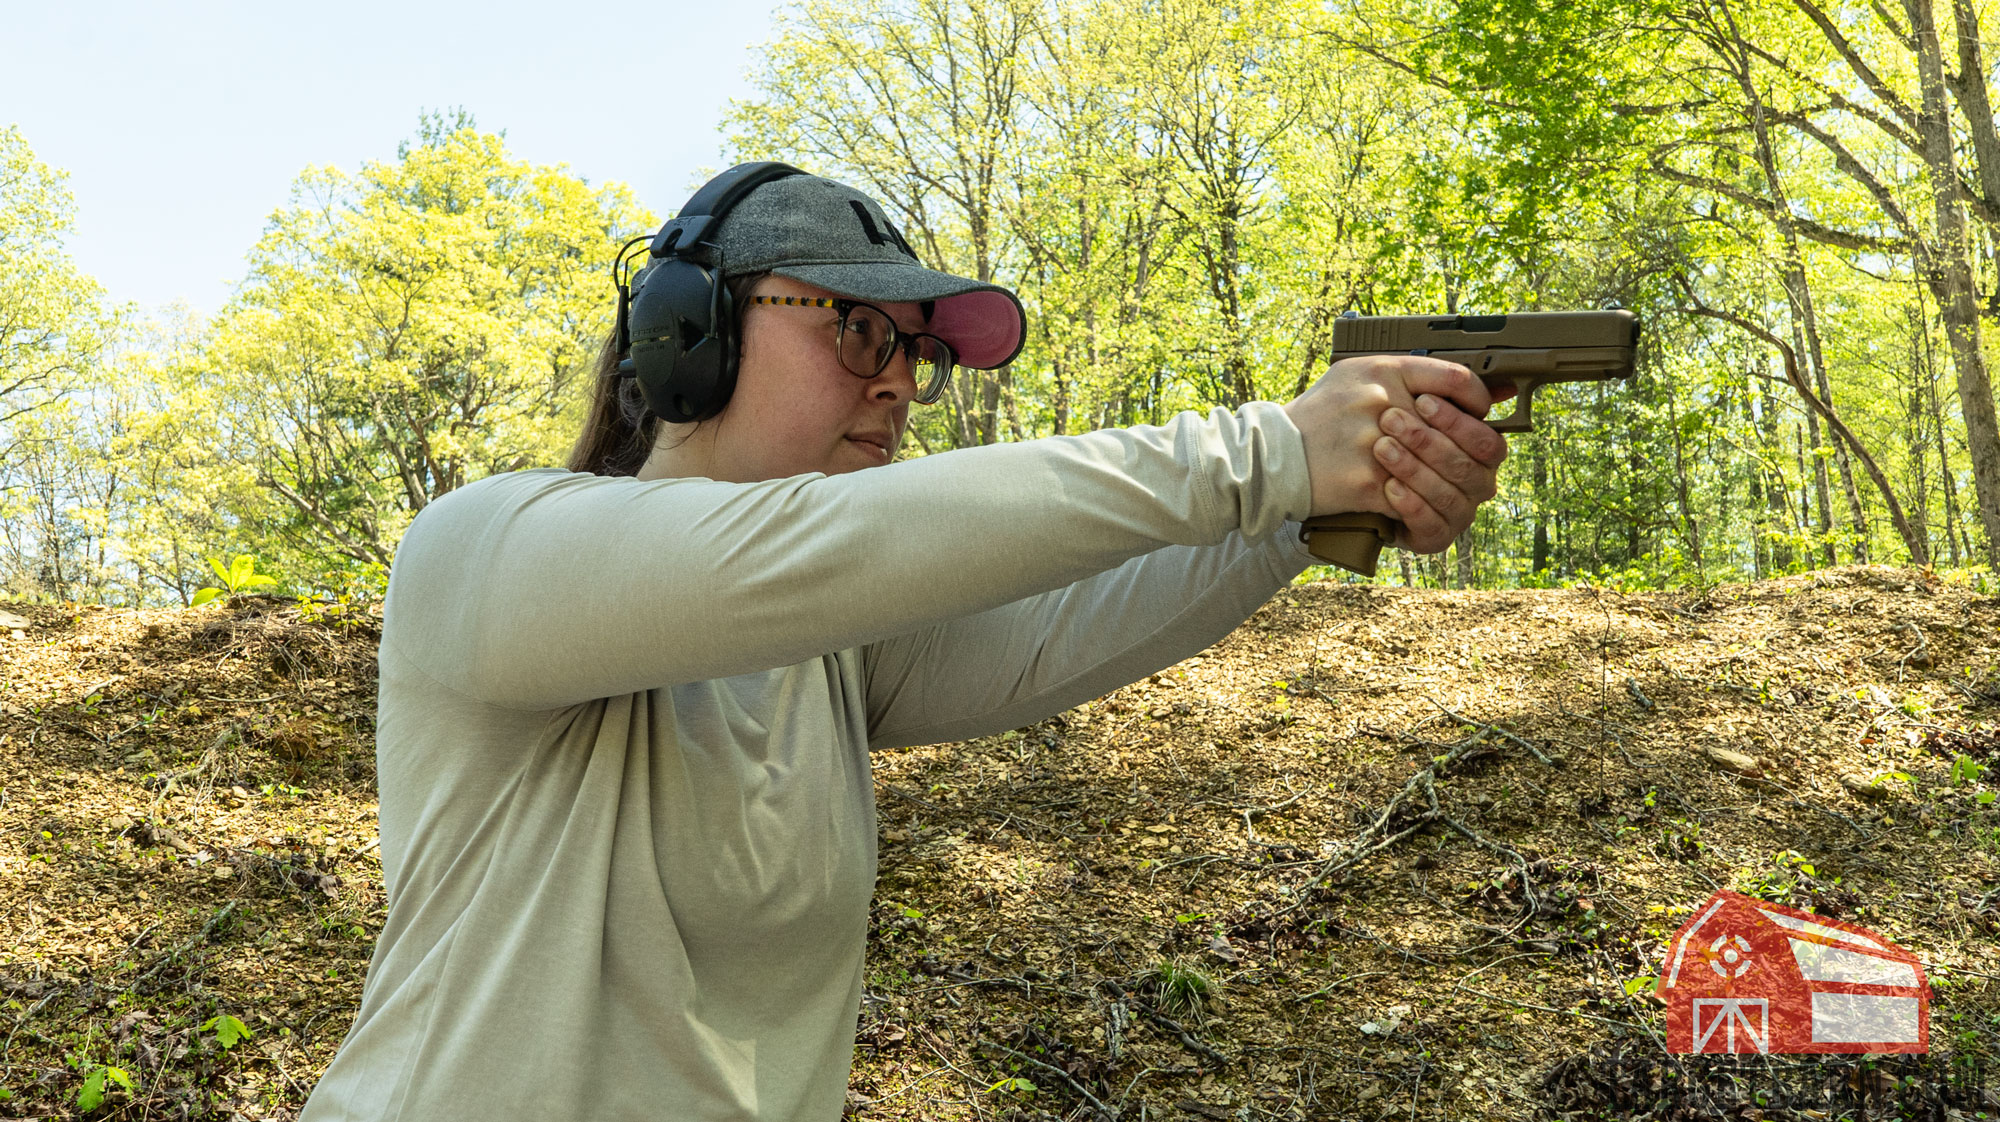 the author shooting a pistol at the range